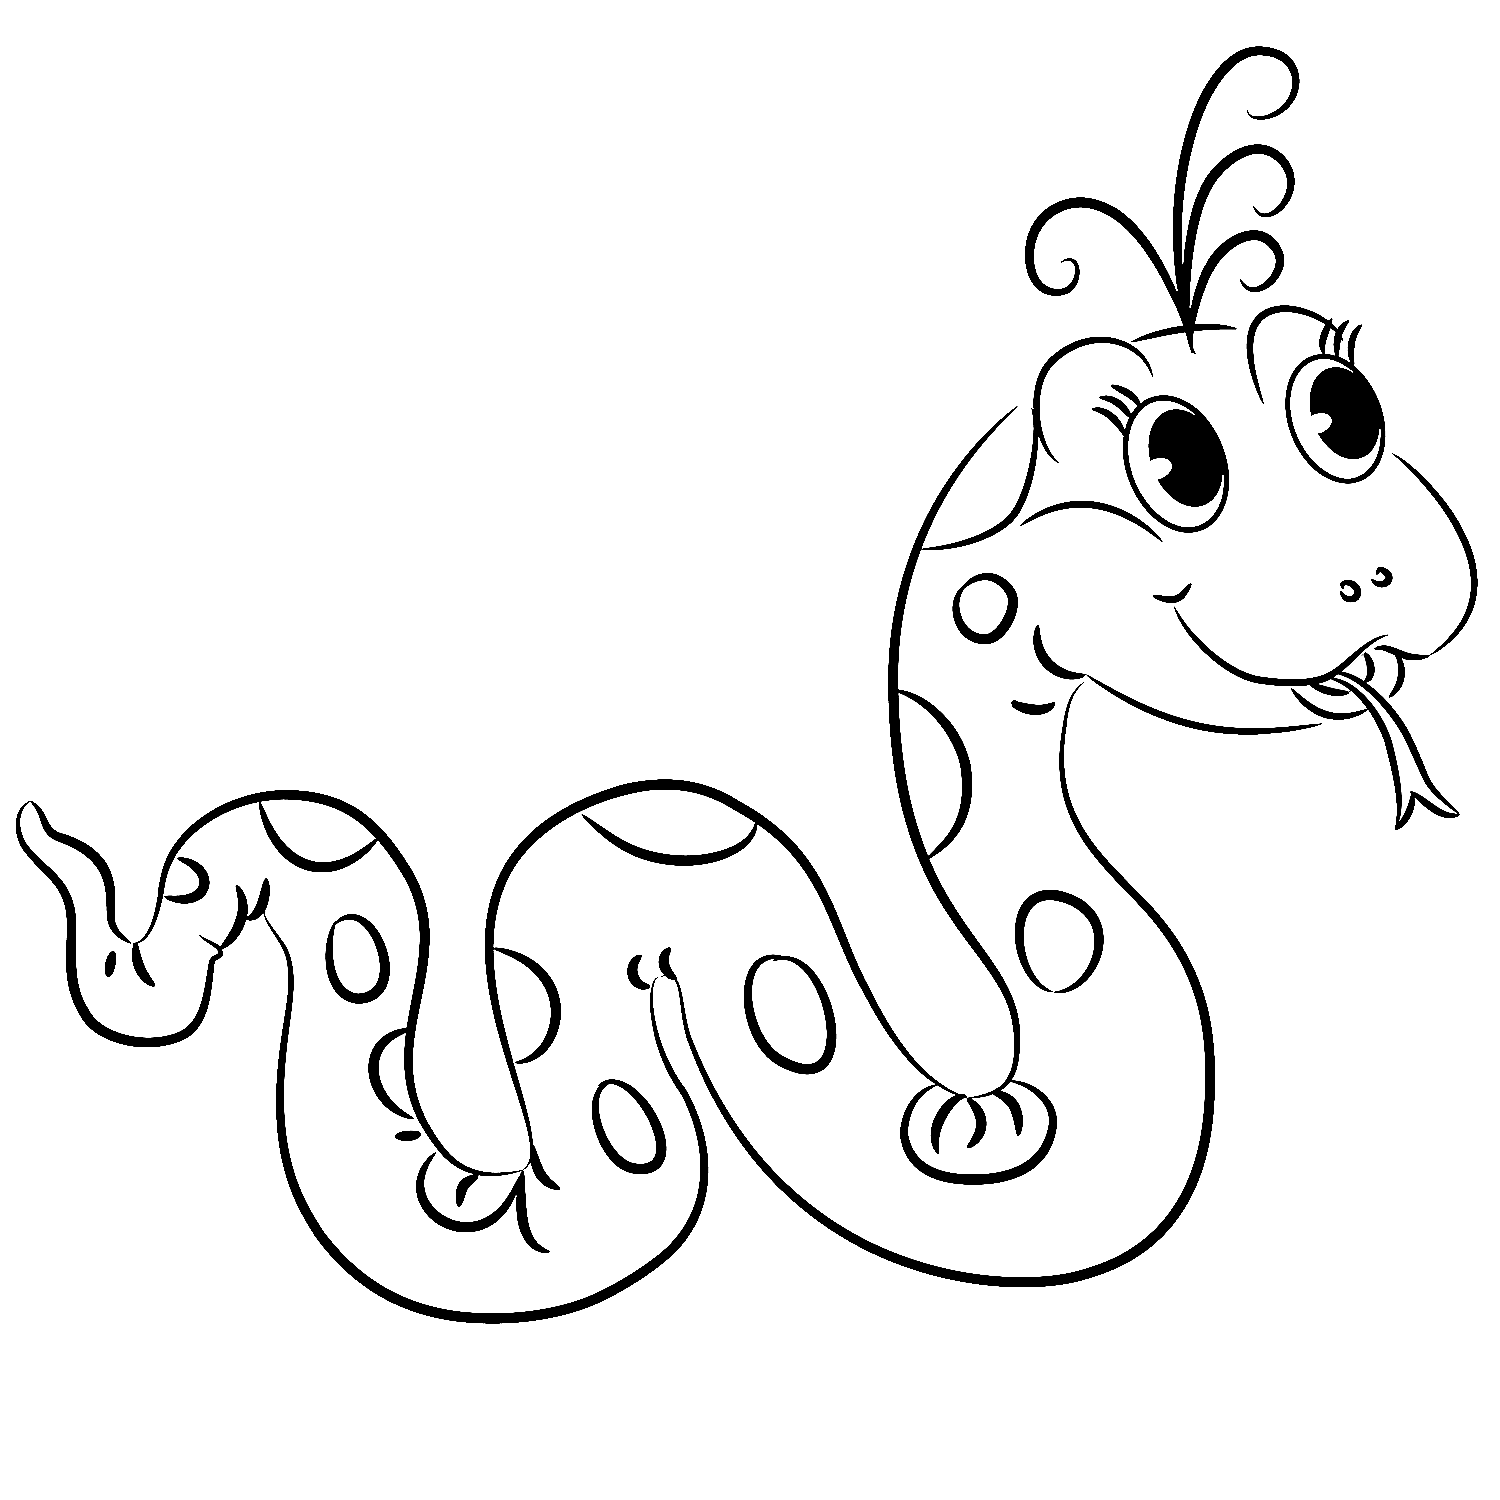 snake coloring sheet snake coloring pages free for children snake coloring sheet 